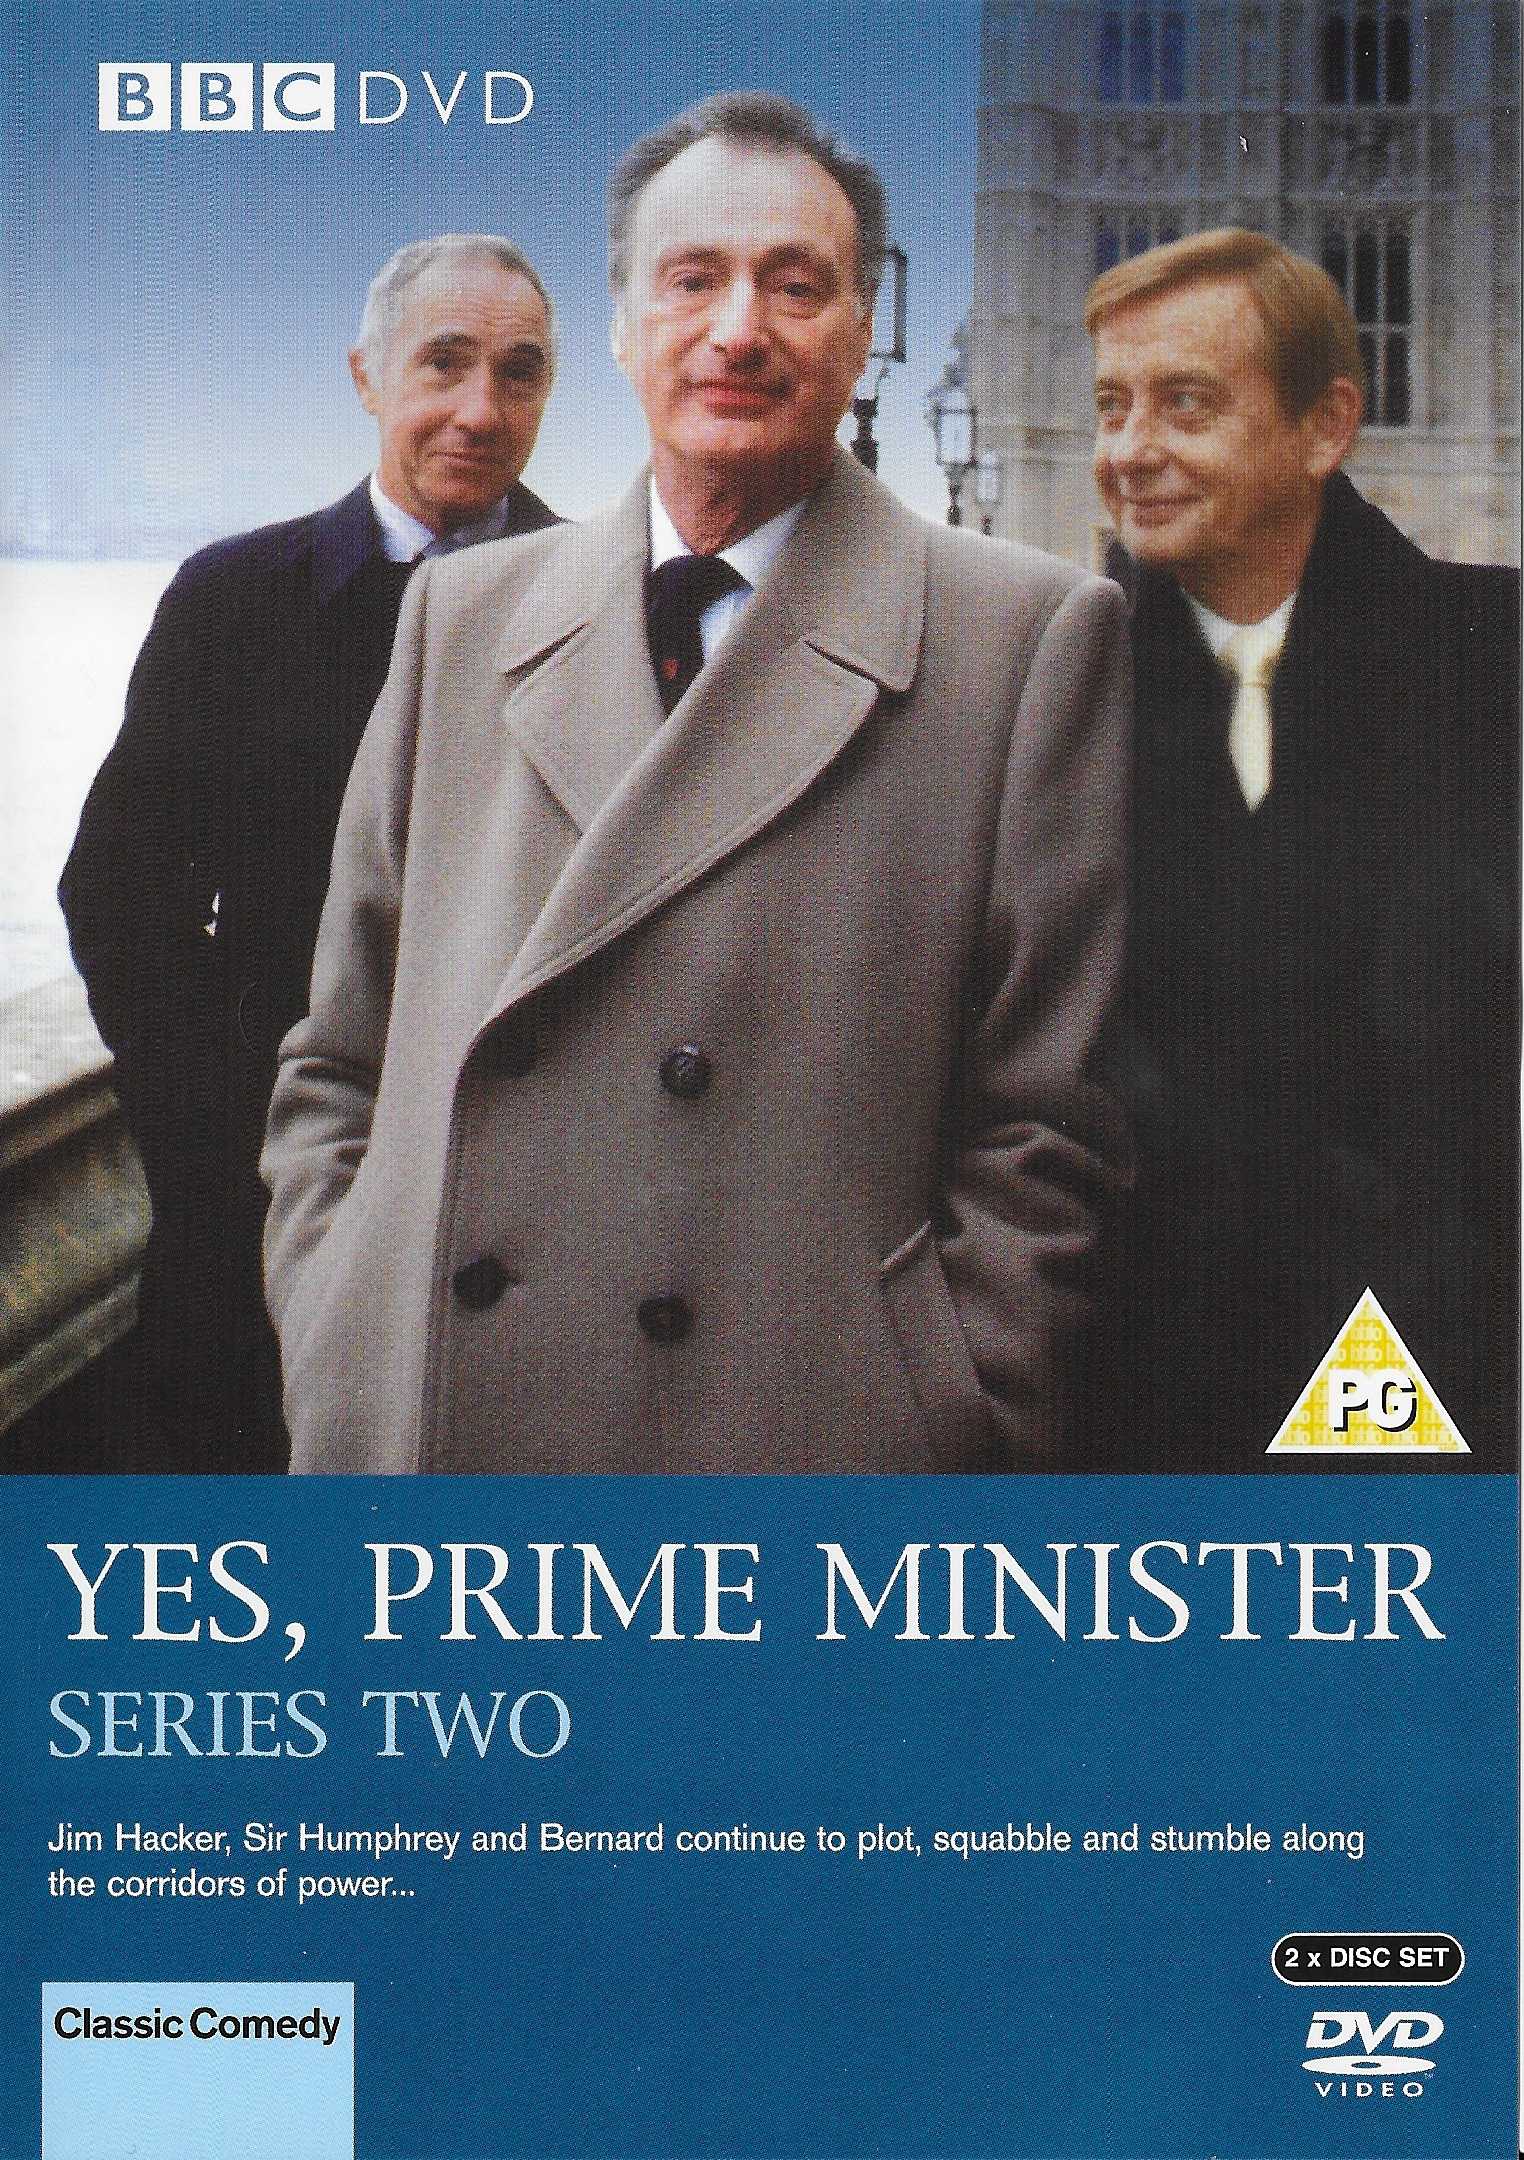 Picture of BBCDVD 1729 Yes, Prime Minister - Series Two by artist Antony Jay / Jonathan Lynn from the BBC dvds - Records and Tapes library